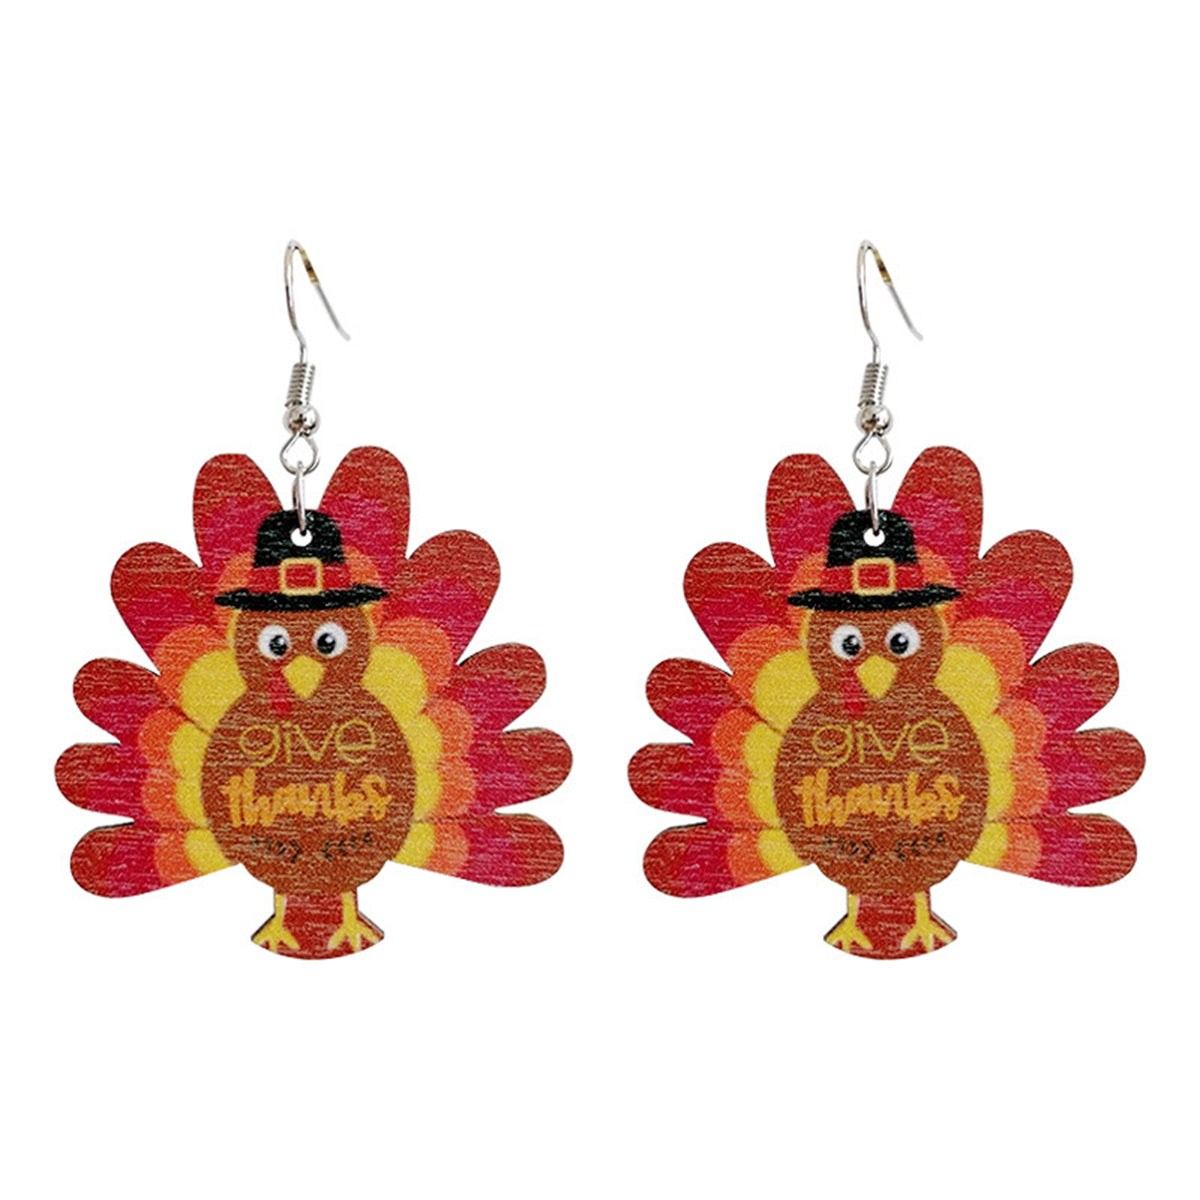 Red & Brown Turkey 'Give Thanks' Drop Earrings